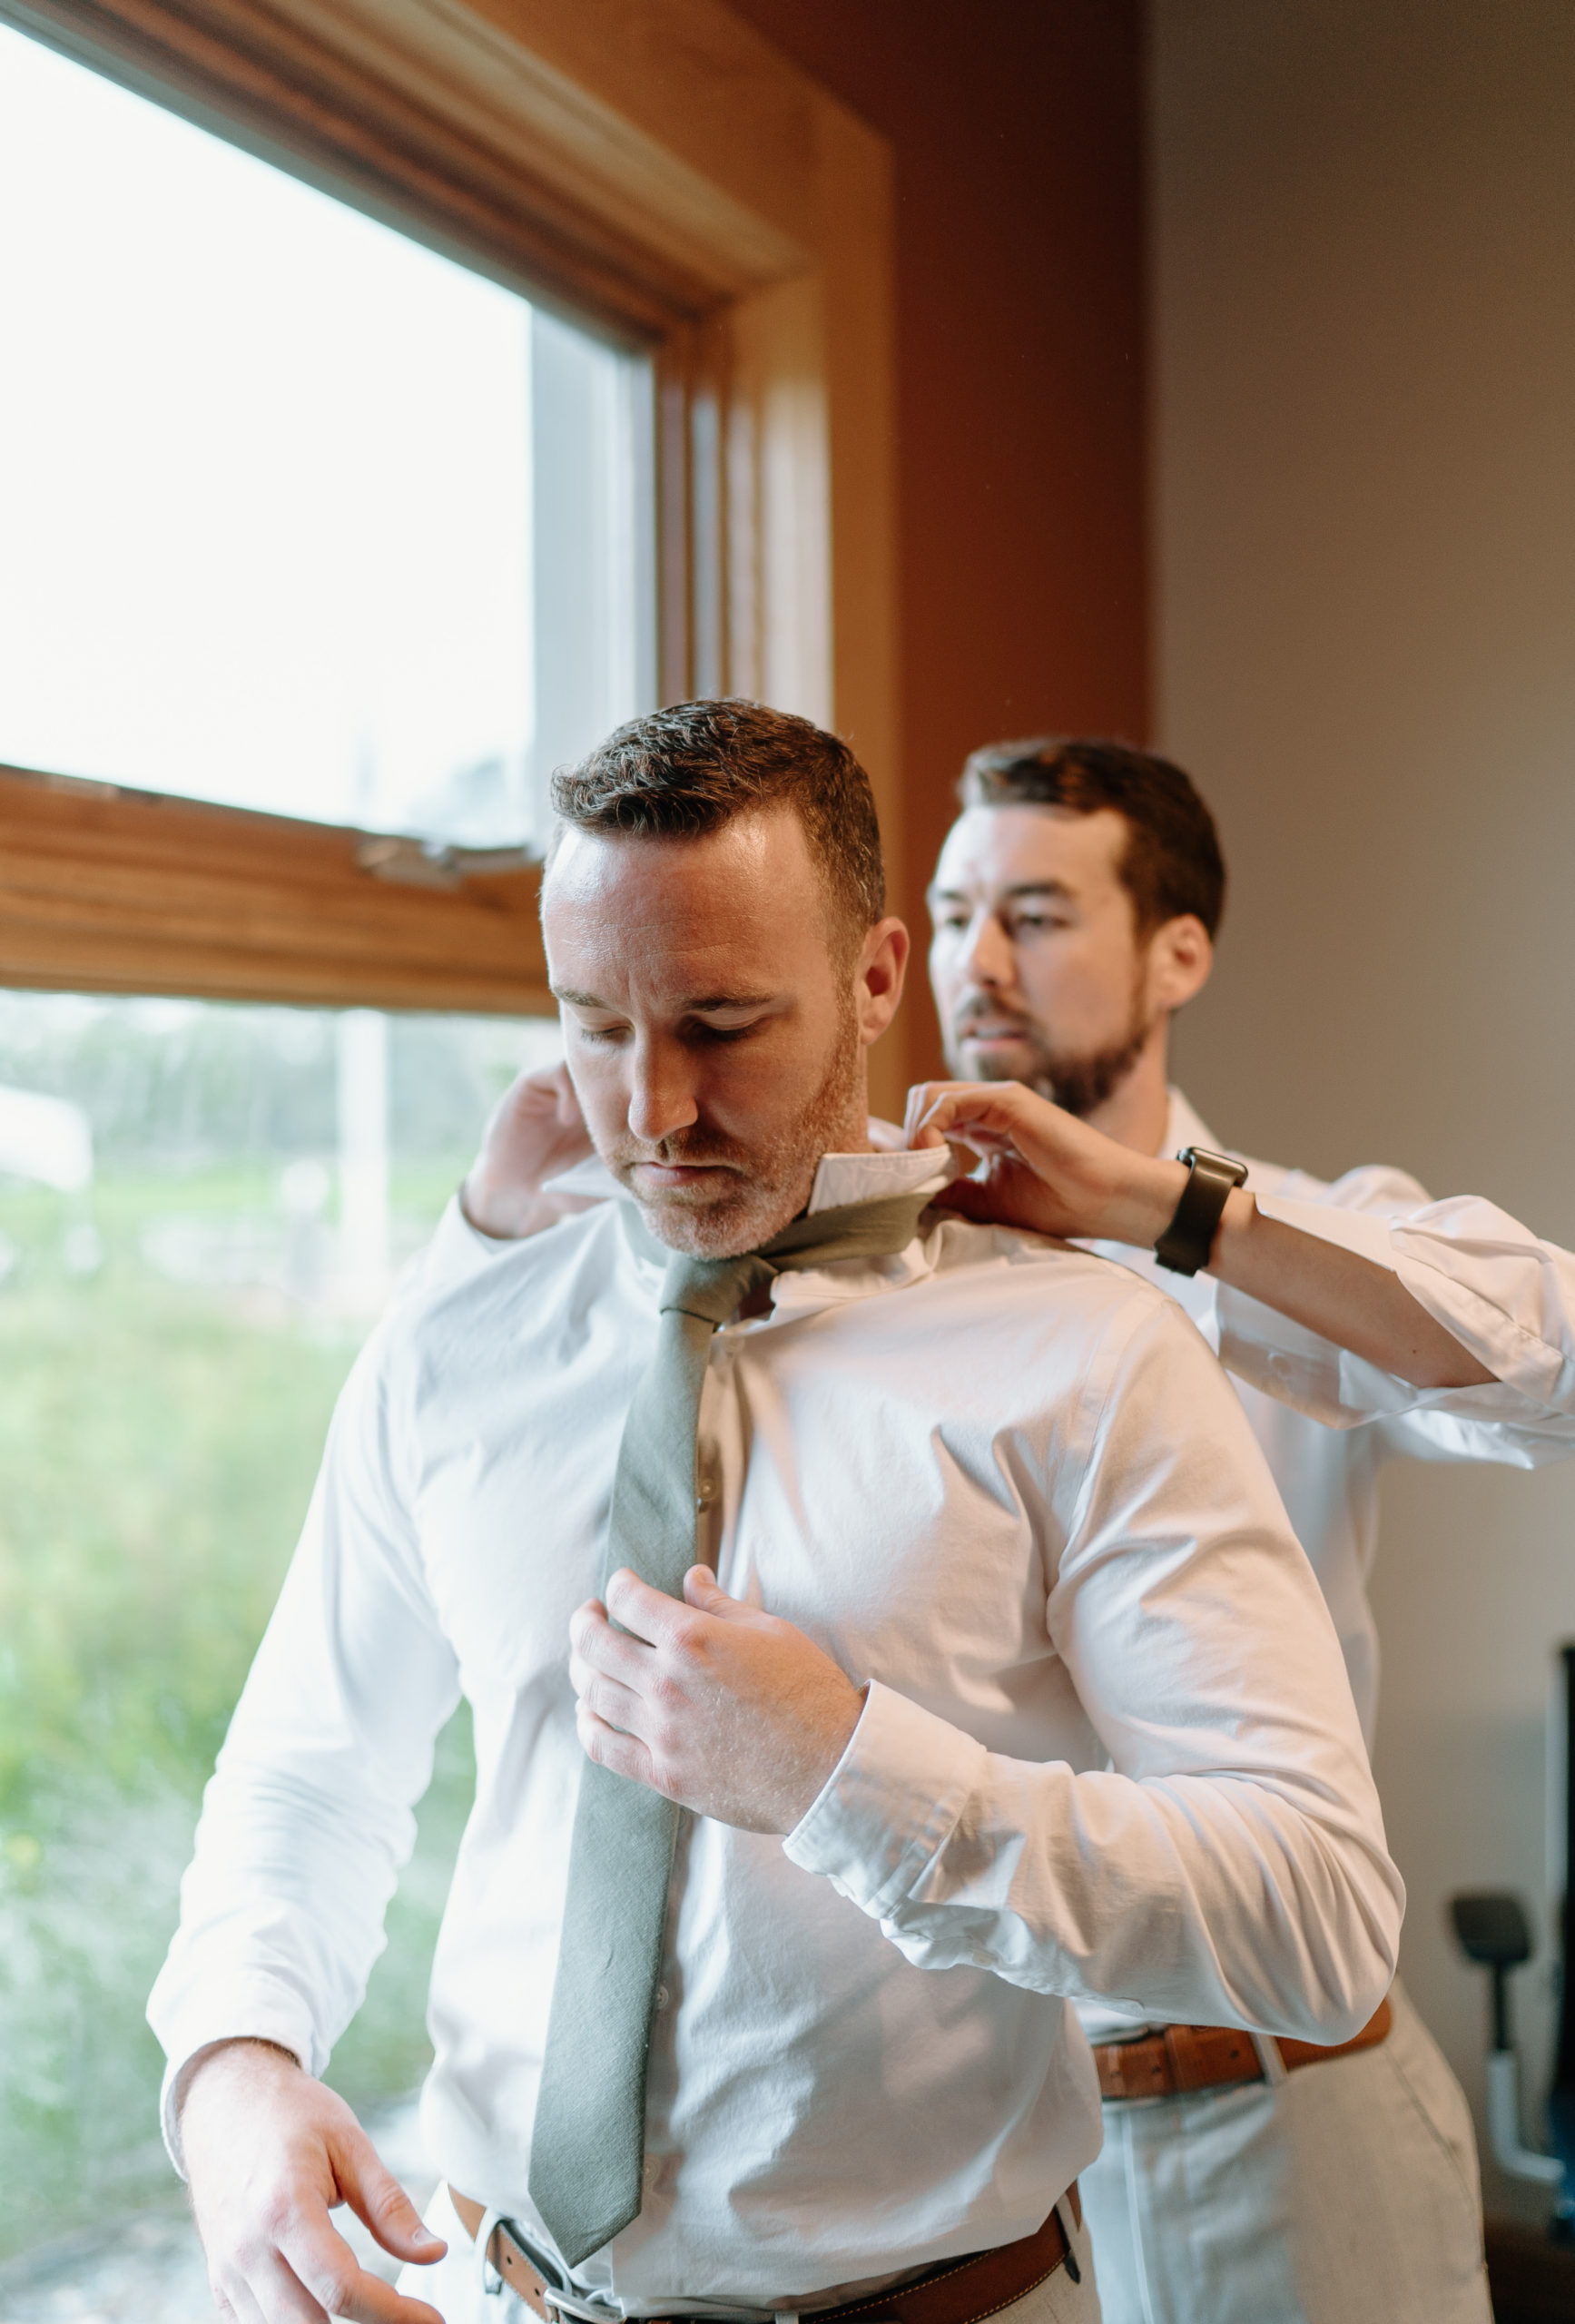 This is a groom getting dressed on his wedding day